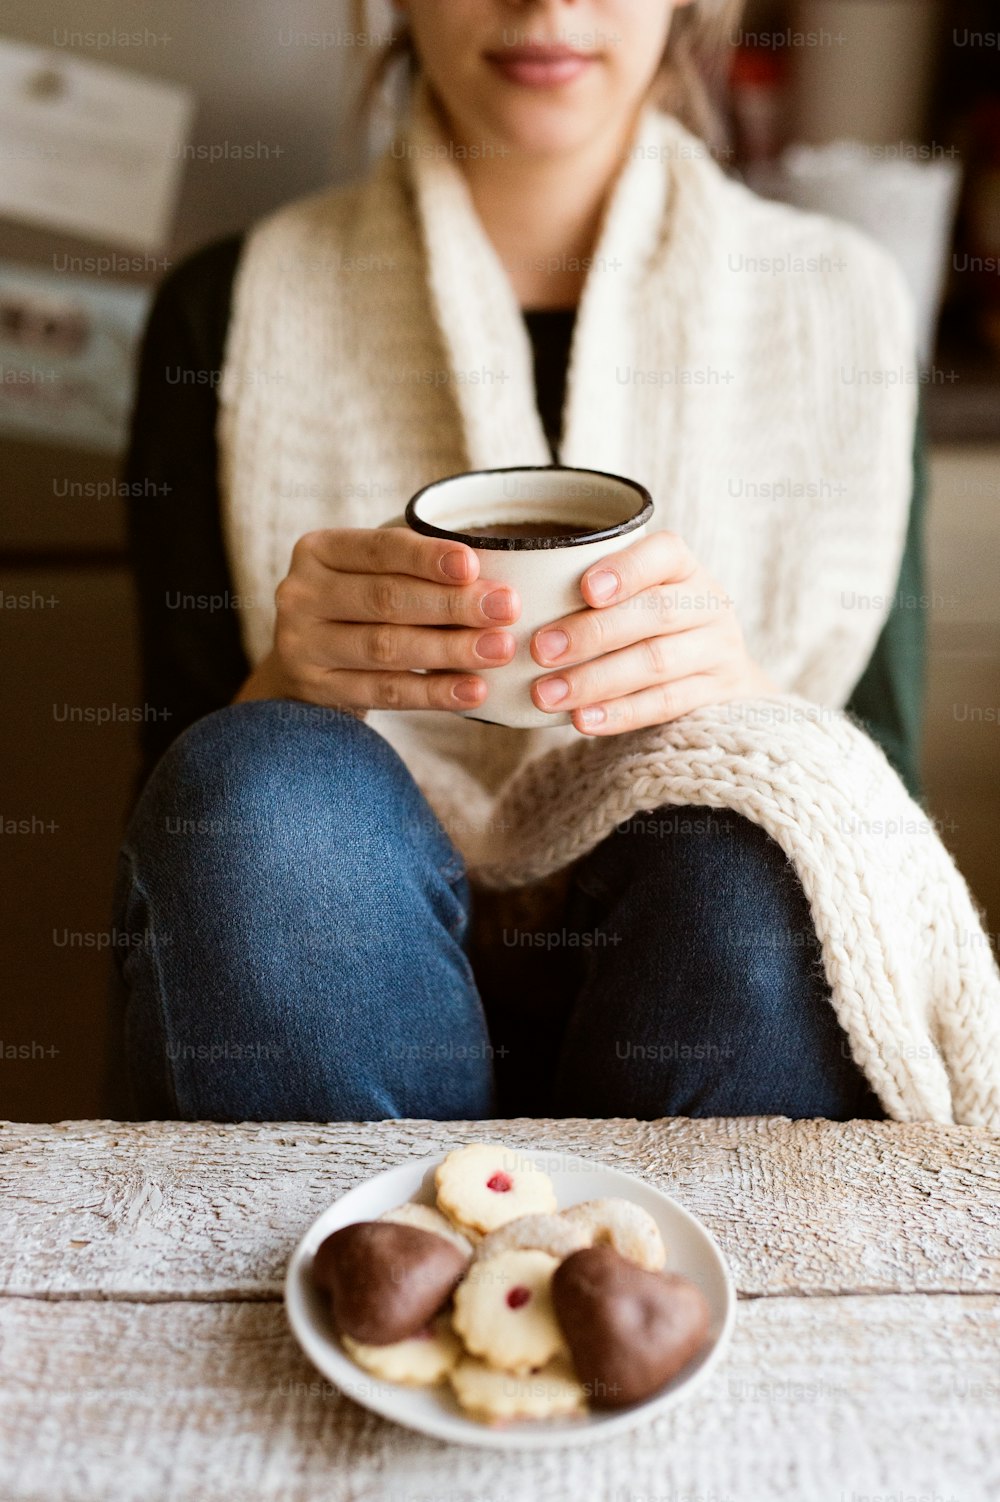 Unrecognizable woman with white knitted scarf holding a mug with coffee. Jam cookies and gingerbread laid on old wooden table.